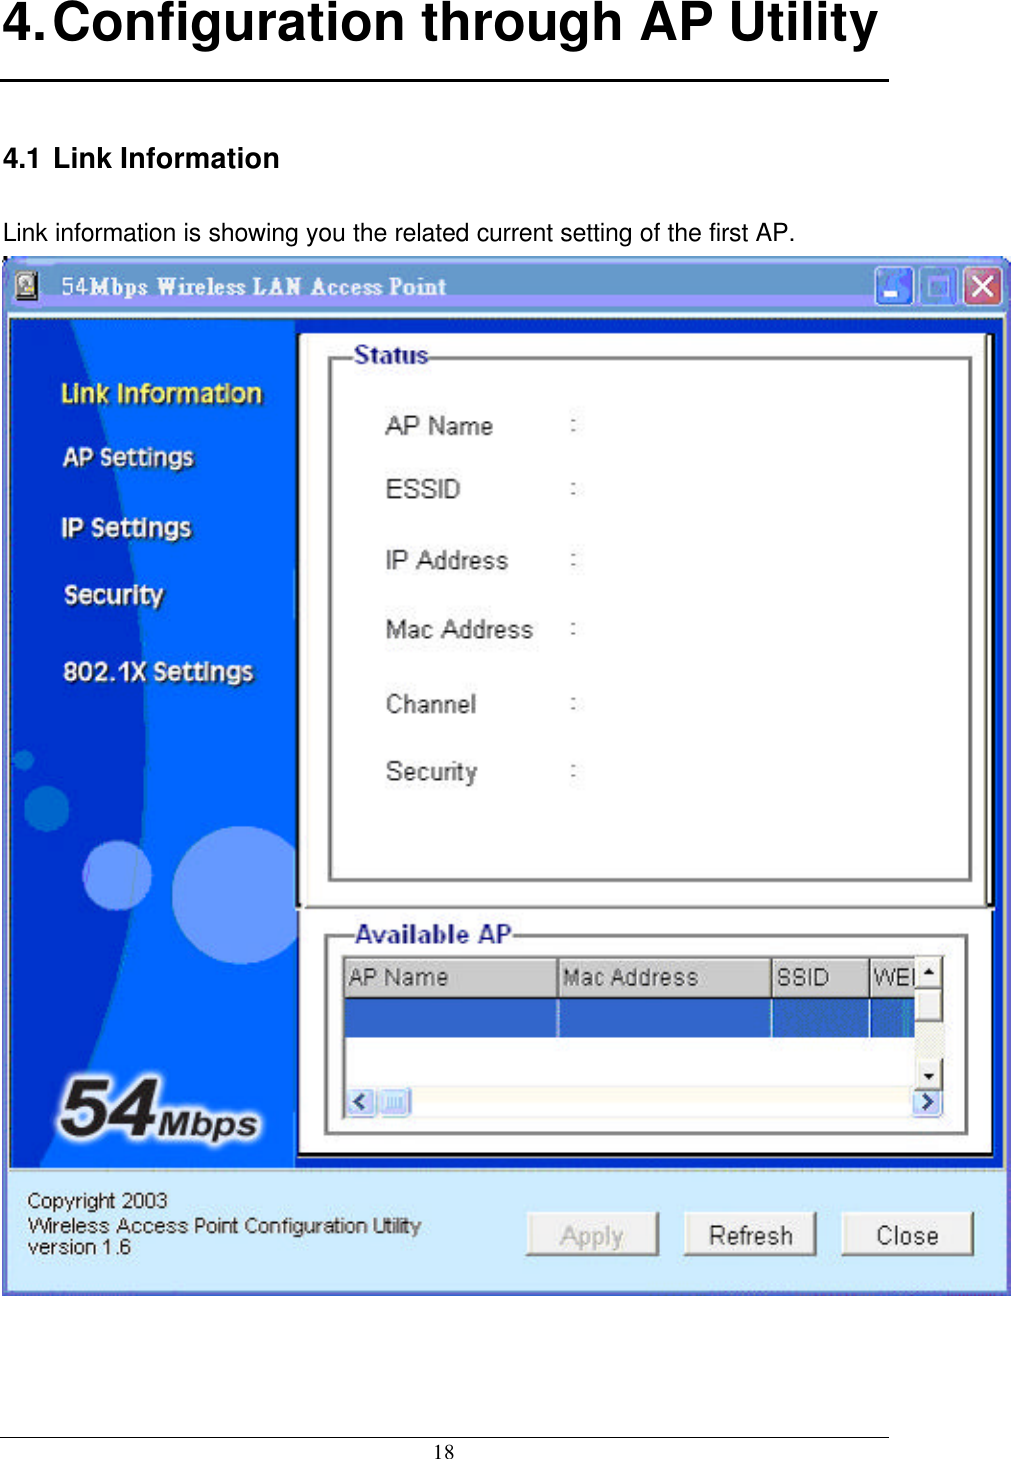 18 4. Configuration through AP Utility 4.1 Link Information Link information is showing you the related current setting of the first AP.   